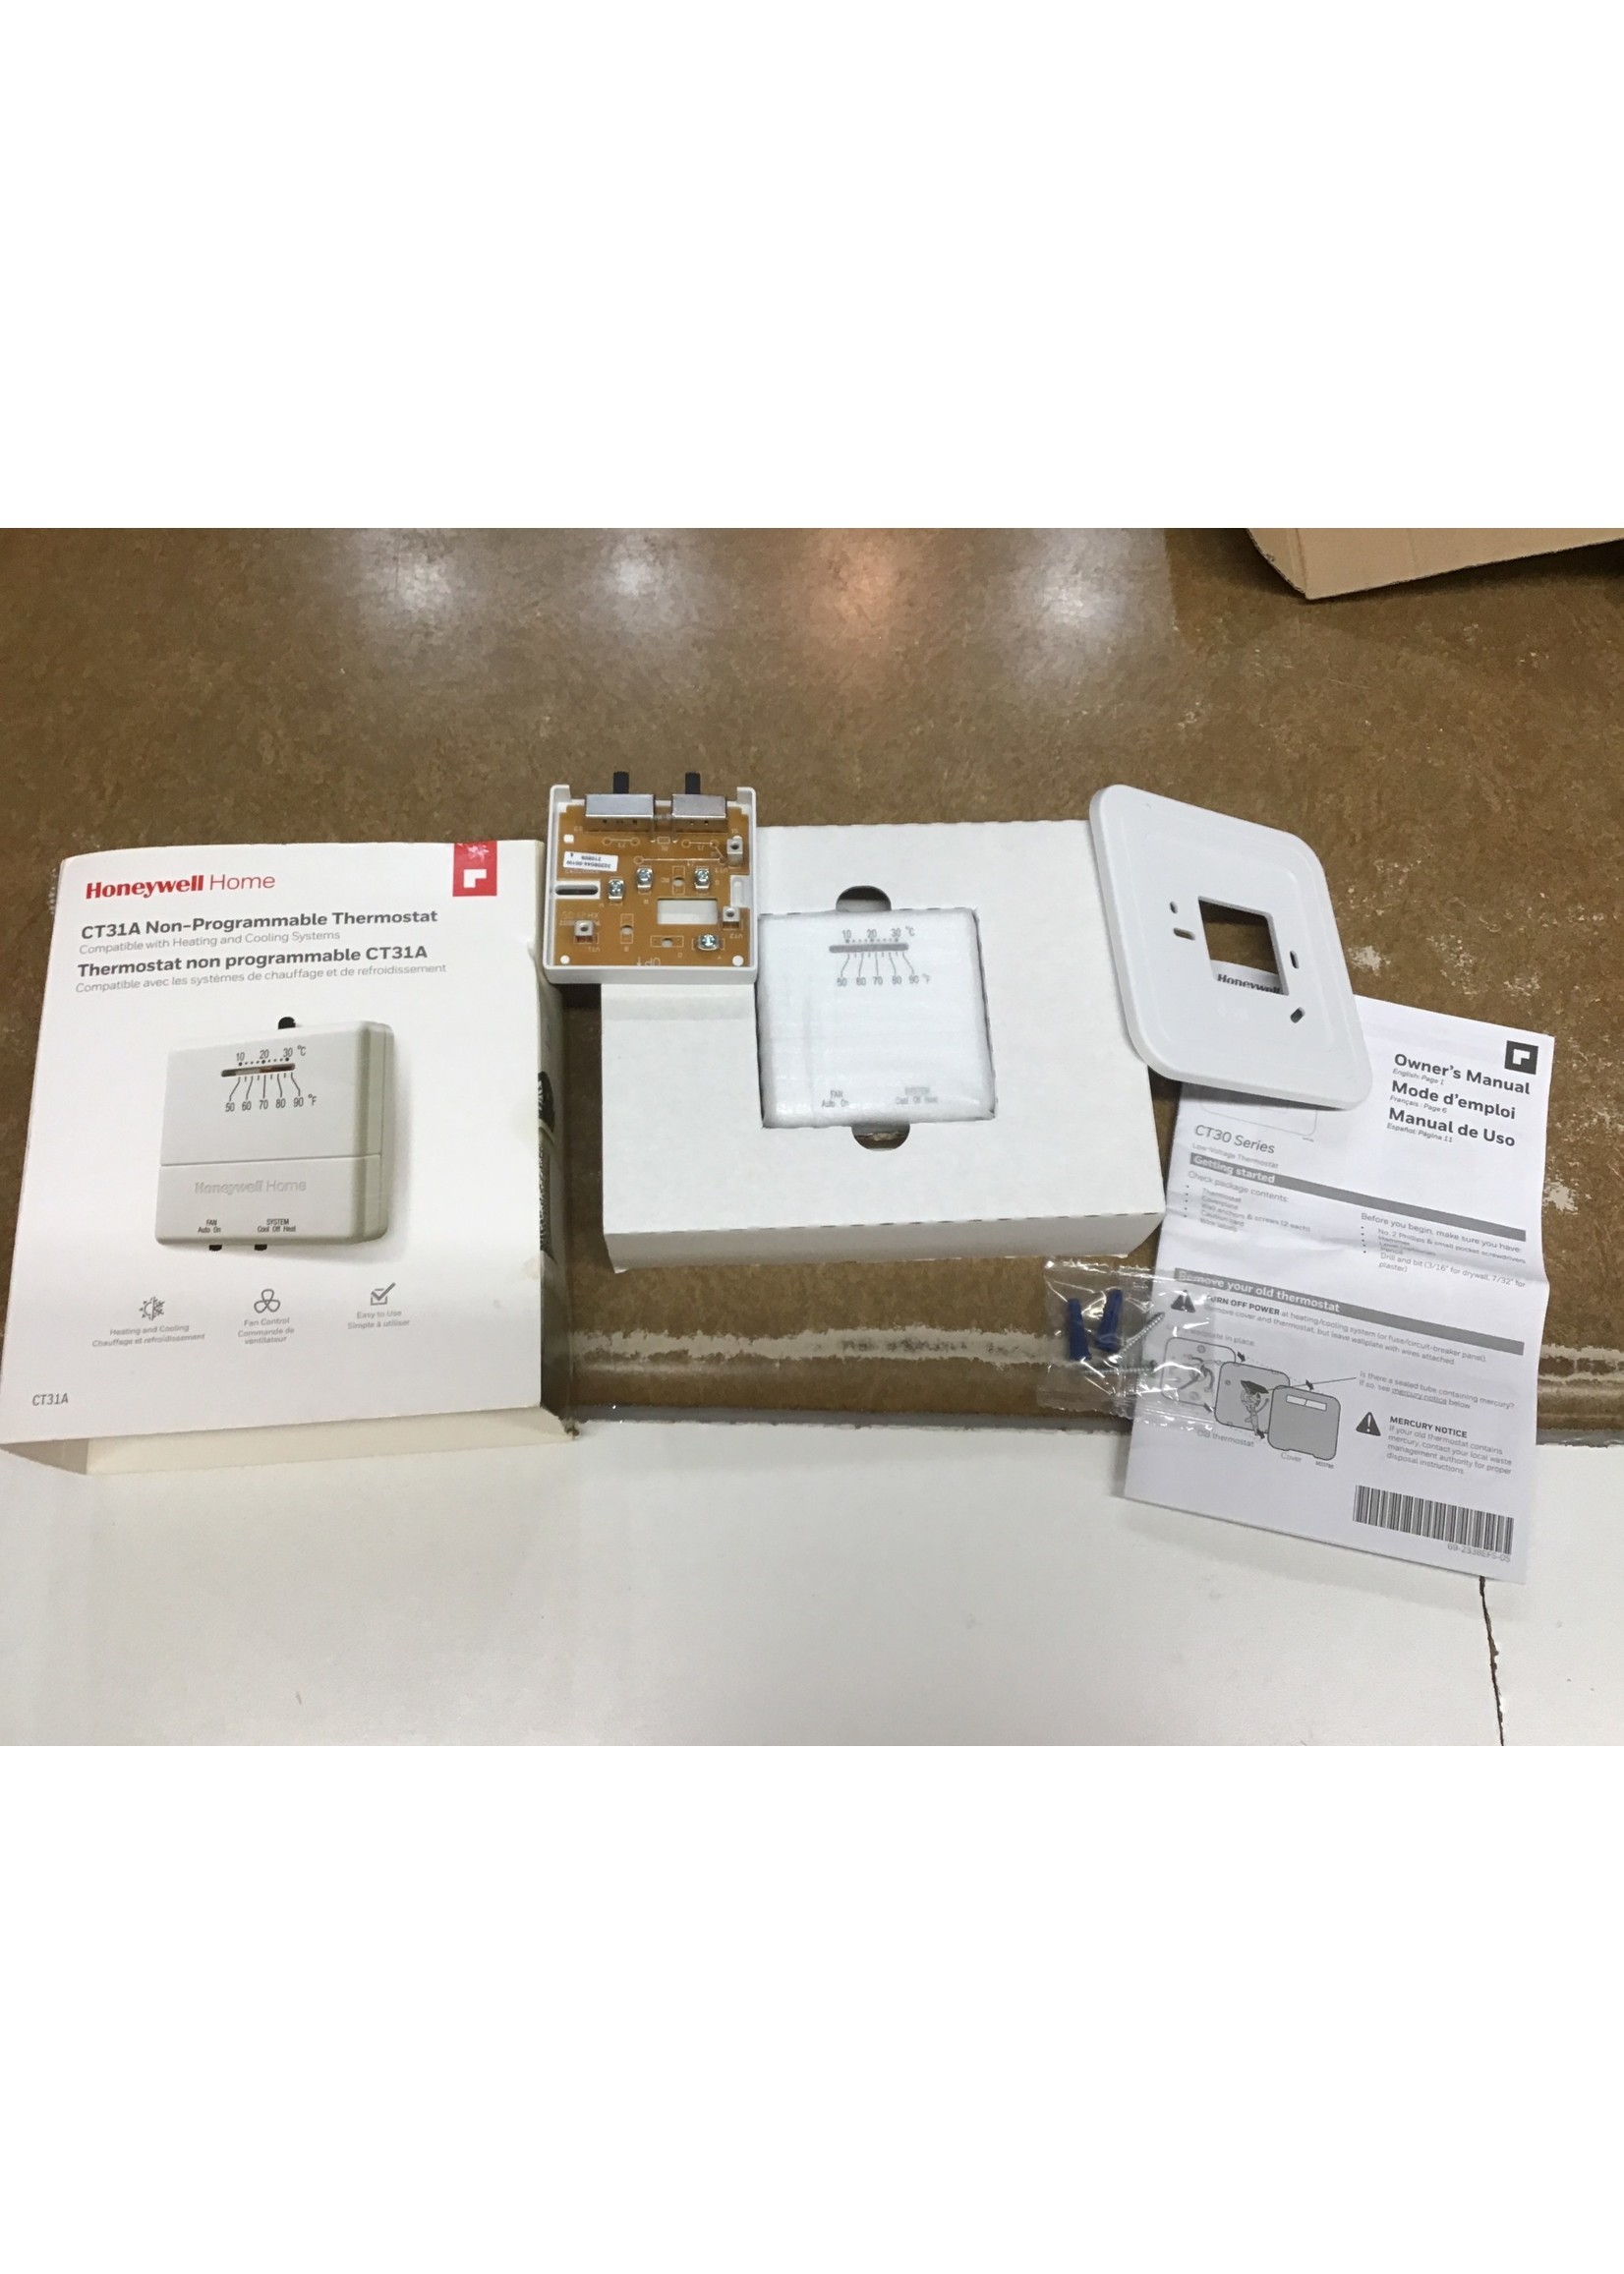 *open box* Honeywell YCT31A 1002 24 Volt Heating And Cooling Thermostat ( all there ) never used